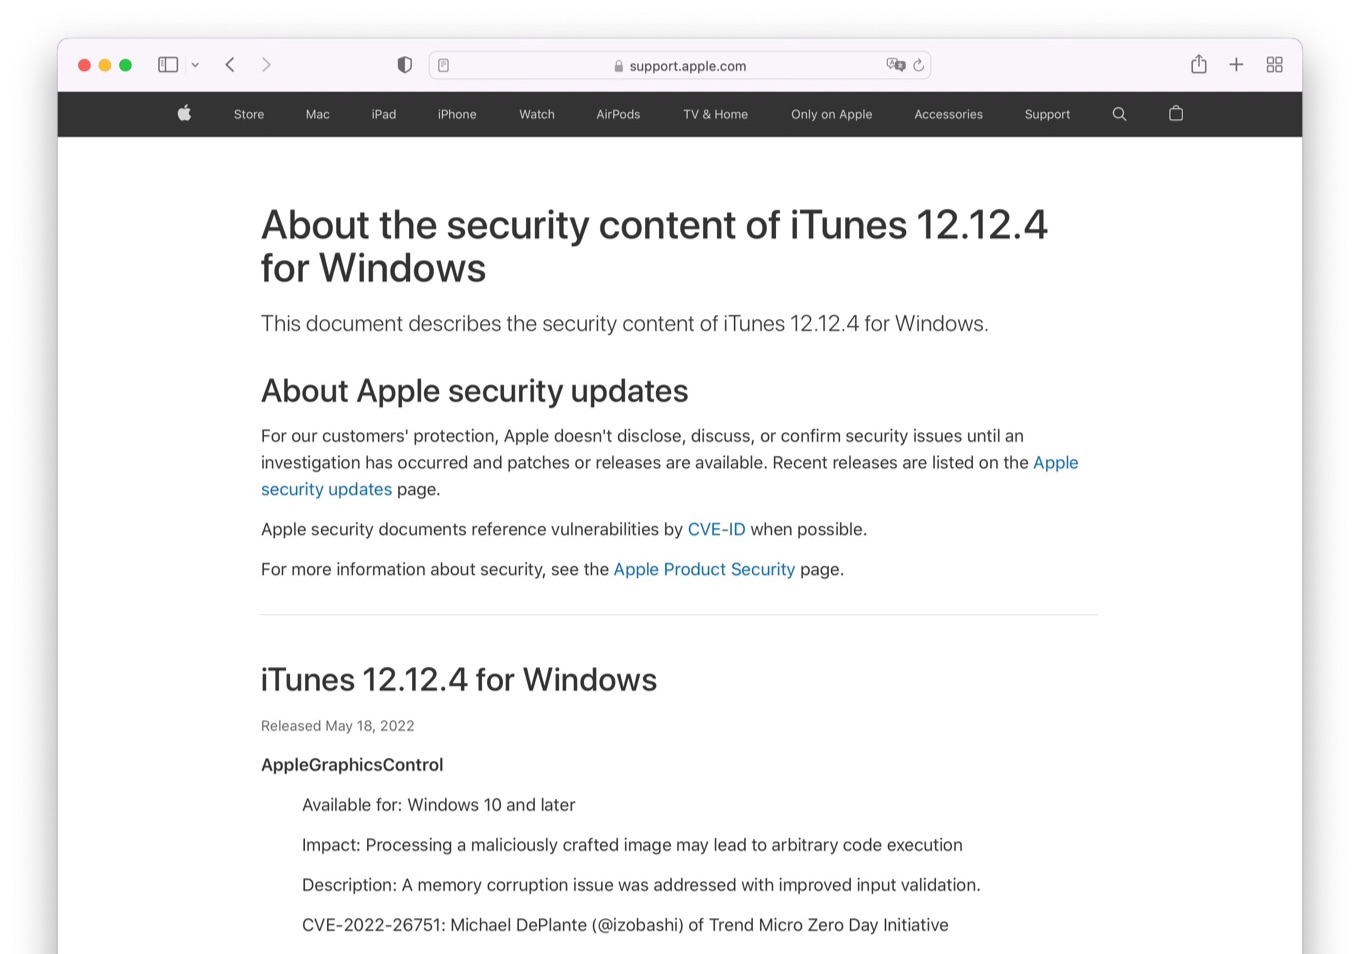 About the security content of iTunes 12.12.4 for Windows